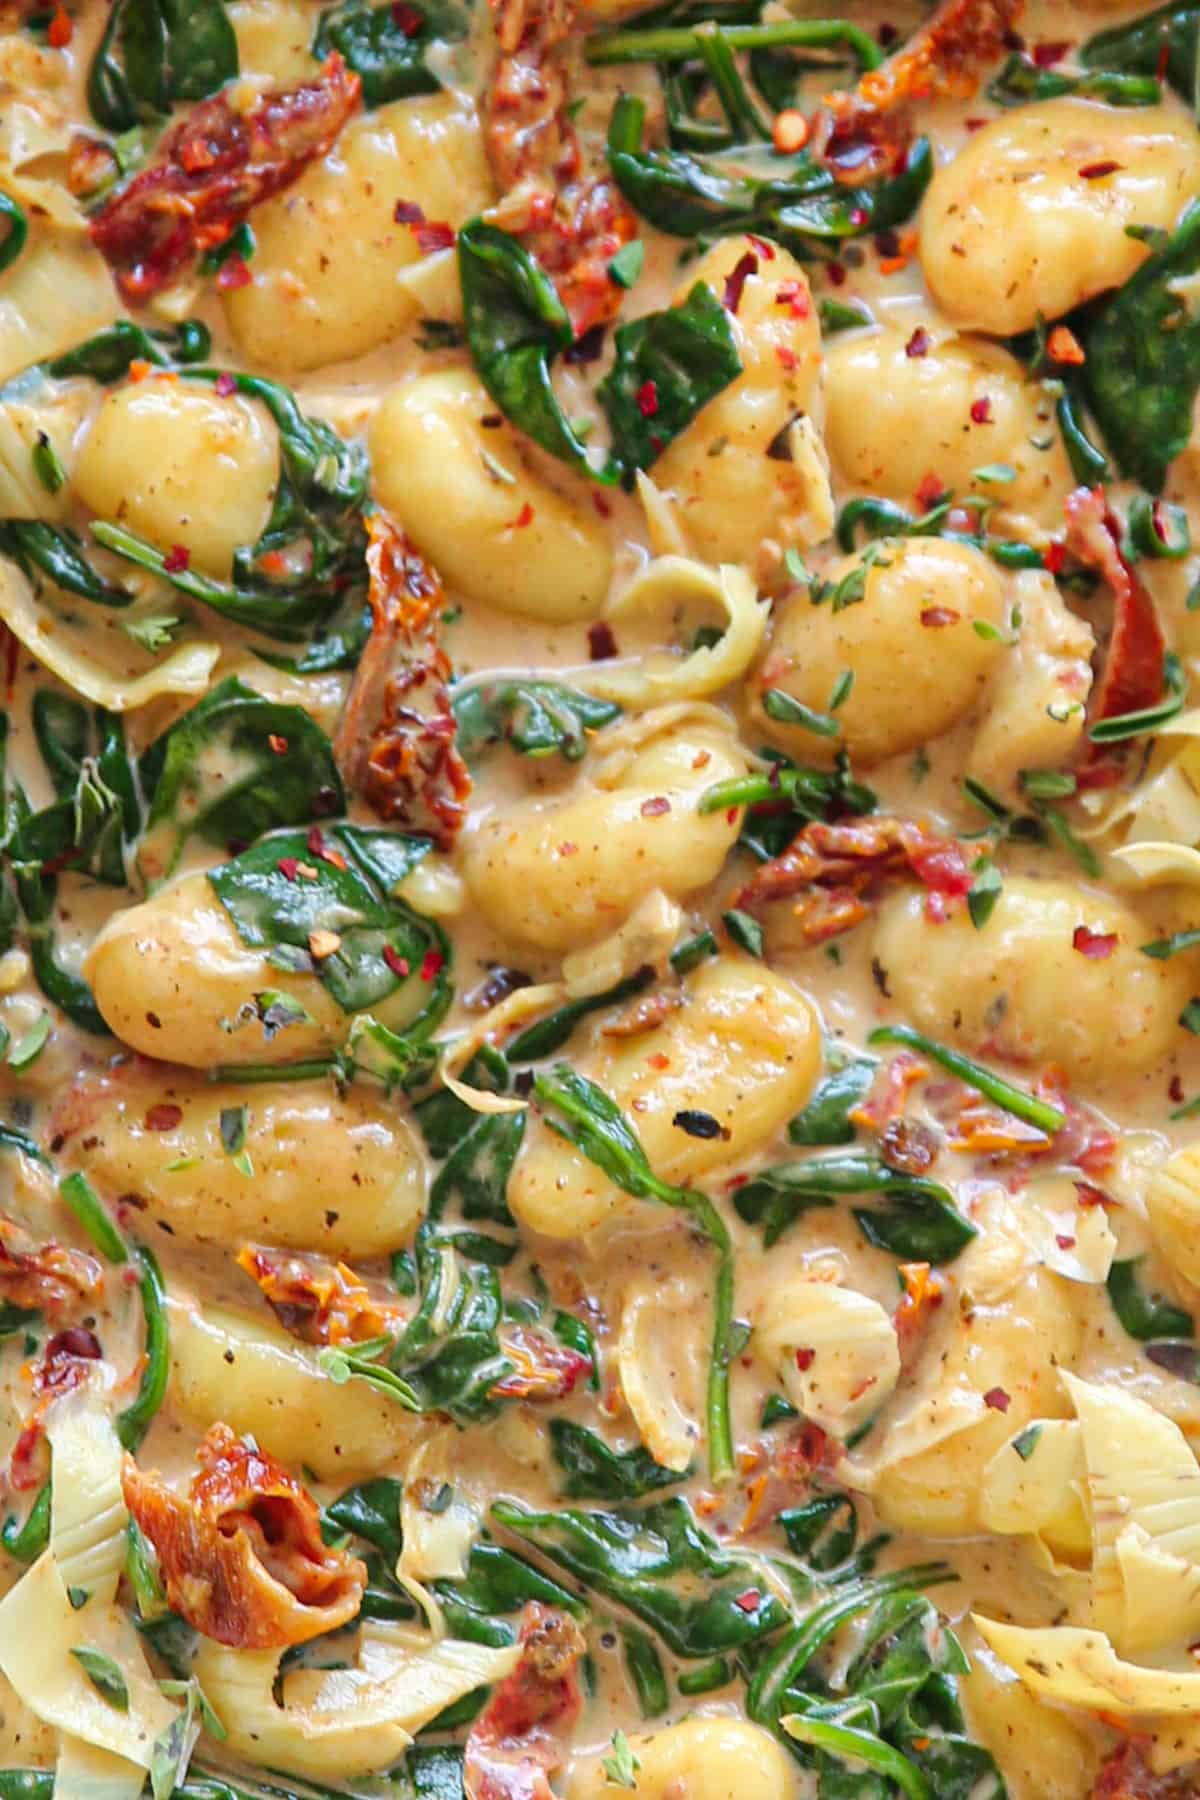 Creamy Tuscan Gnocchi with sun-dried tomatoes, spinach, and artichokes (close-up photo).